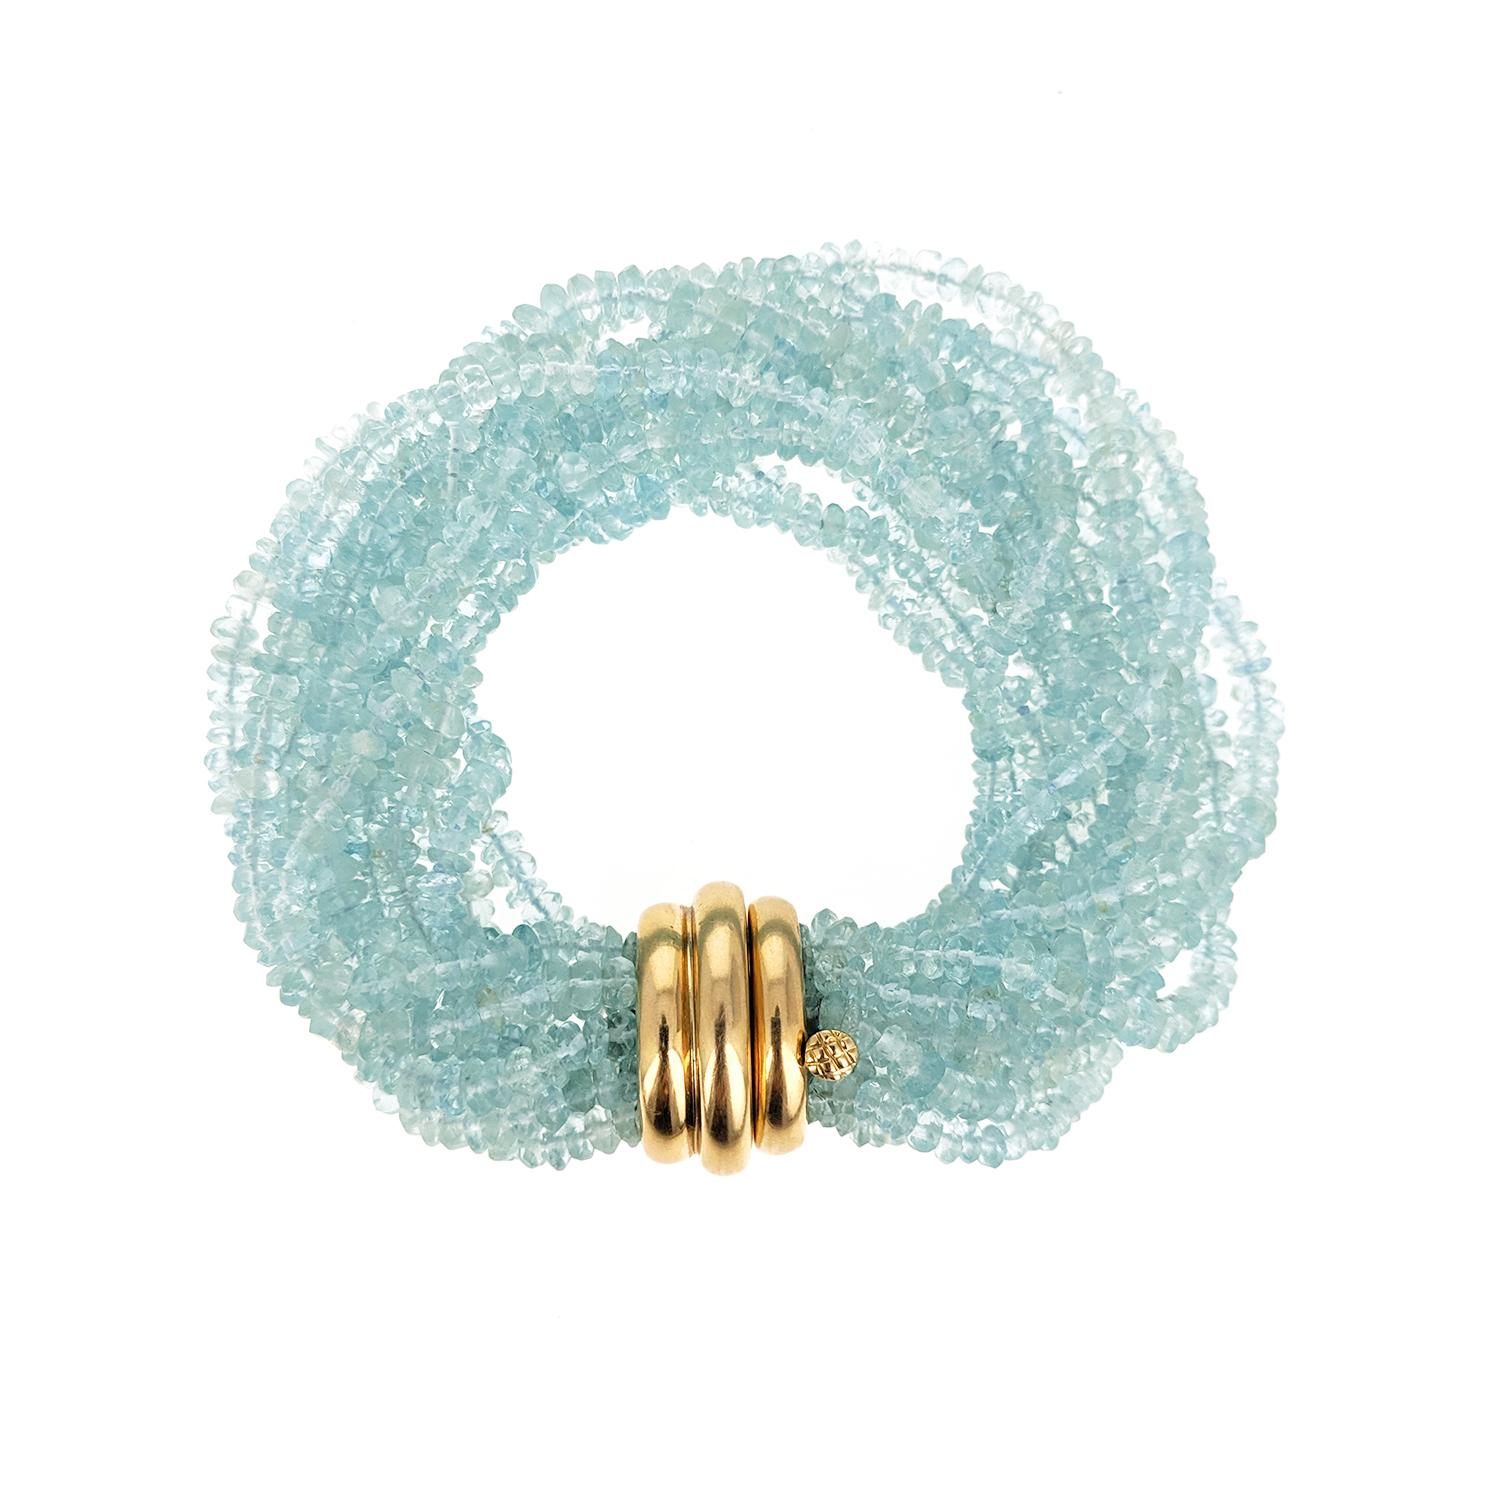 The beautiful bracelet is made of fourteen strands of faceted aquamarine beads and has a polished 18 karat yellow gold bombe clasp. It can be worn twisted or not, depending on the size of your wrist. It is signed Verdura and made in 2004. 8.5 inches